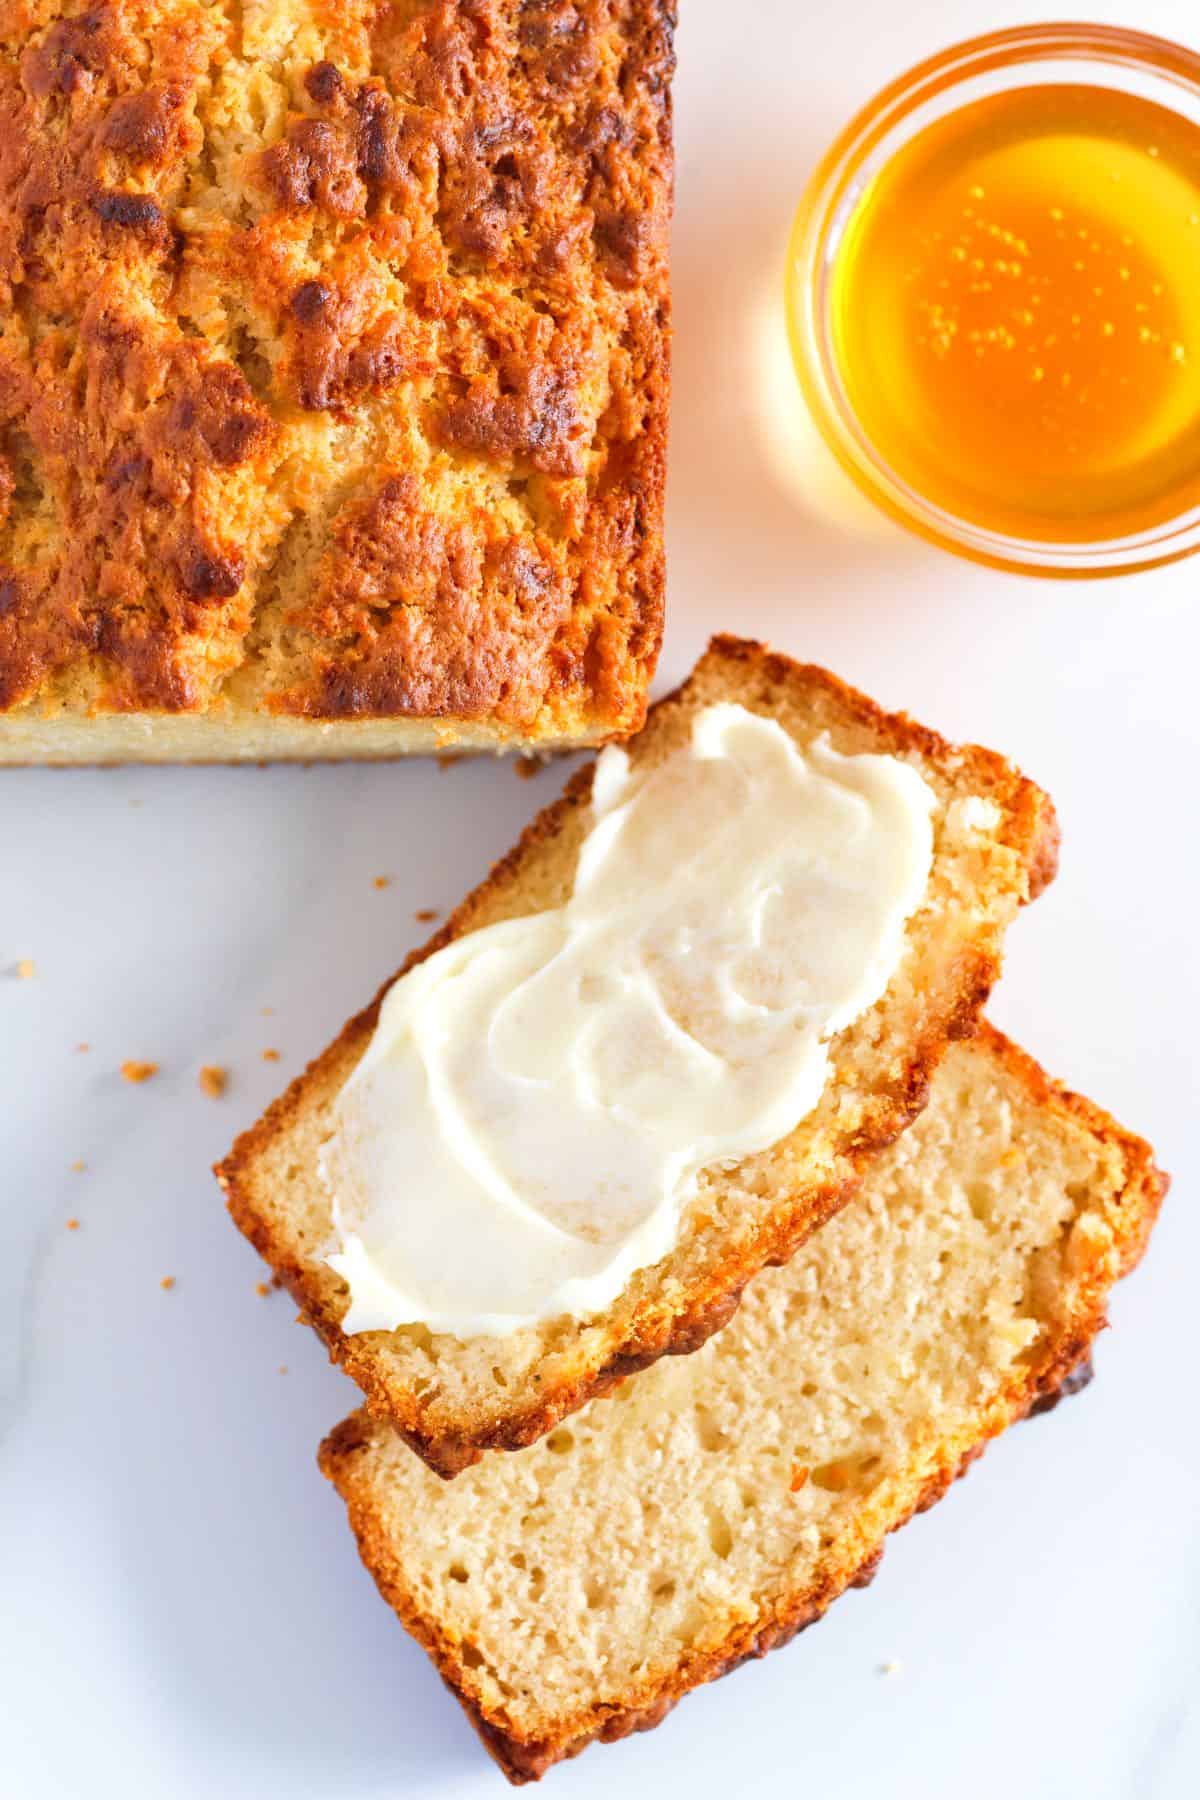 Slices of cheese beer bread with an amazing buttery crust!